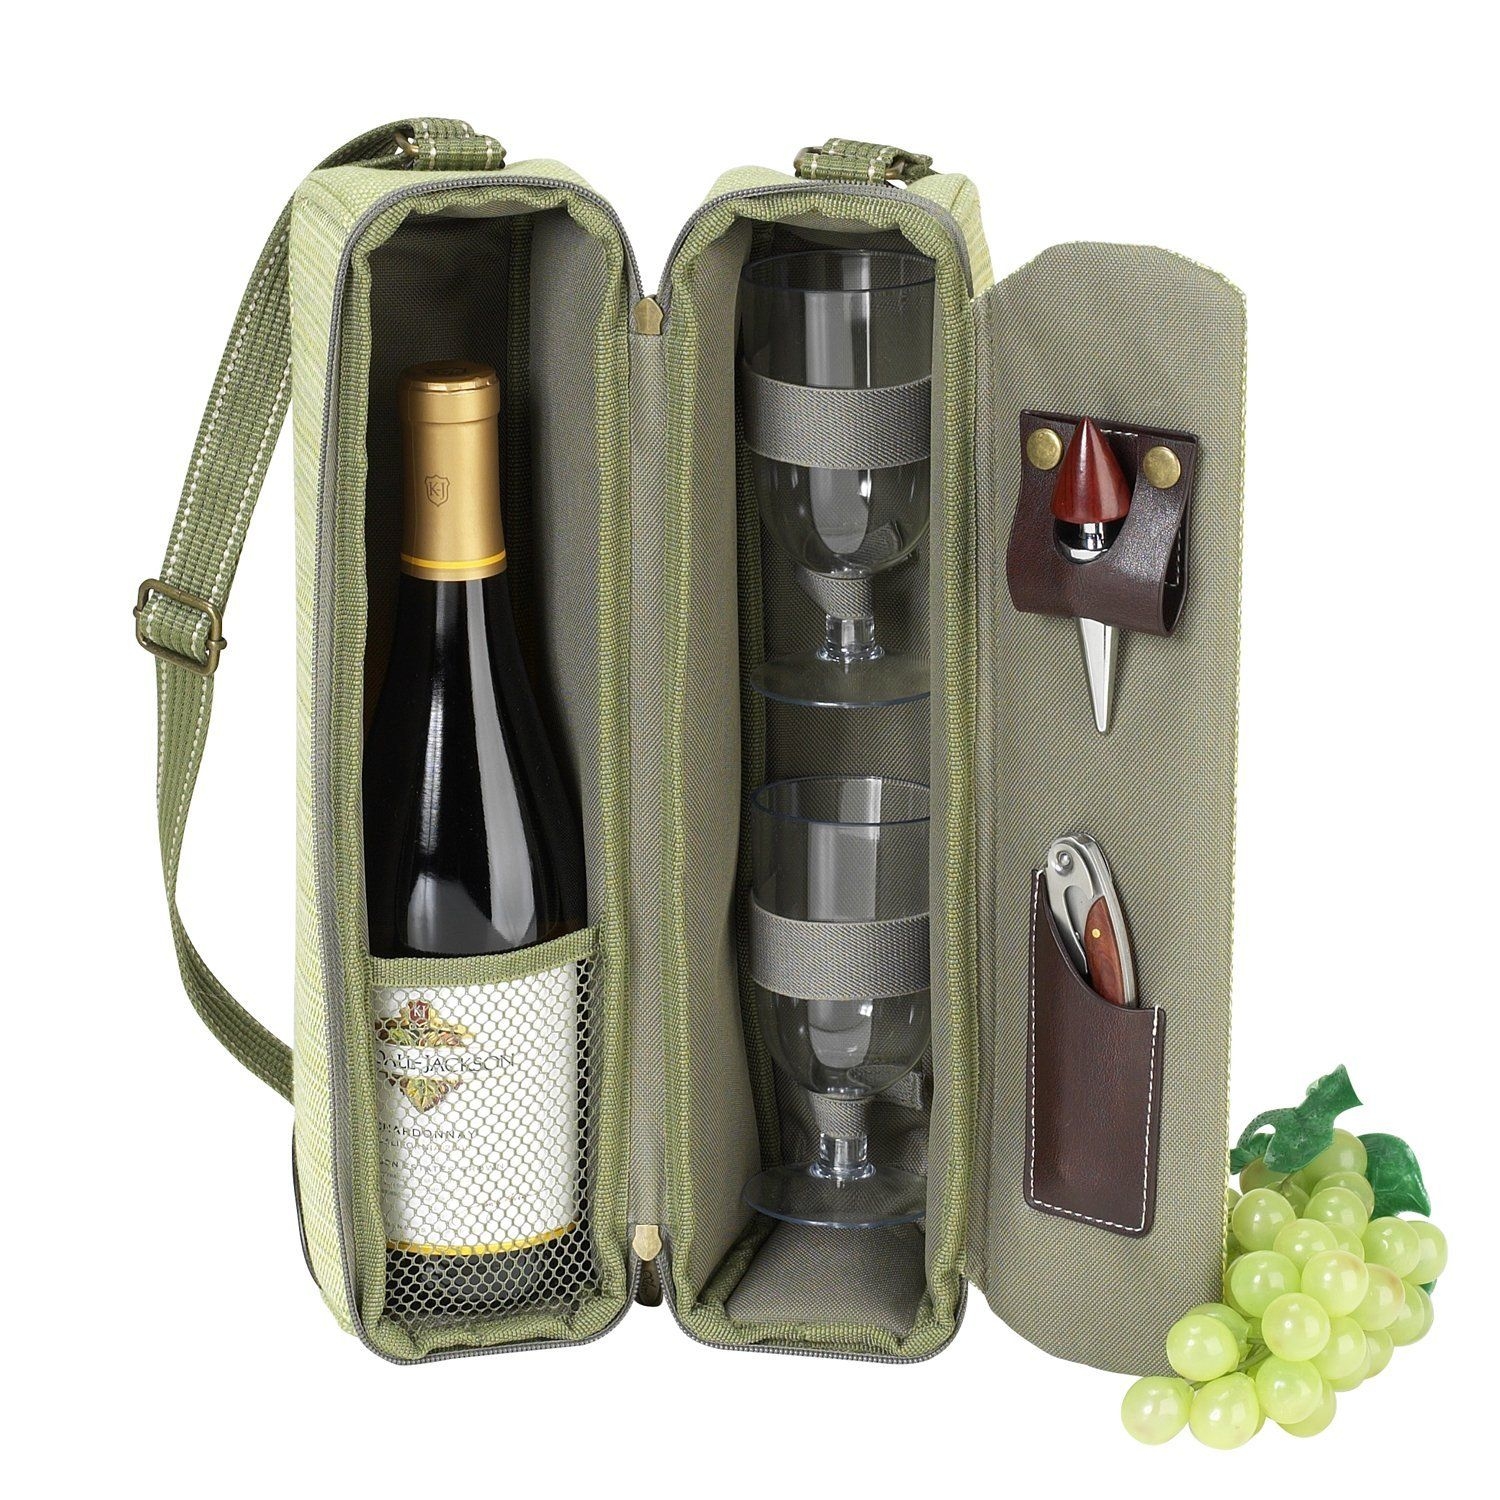 Wine glass carrier 3